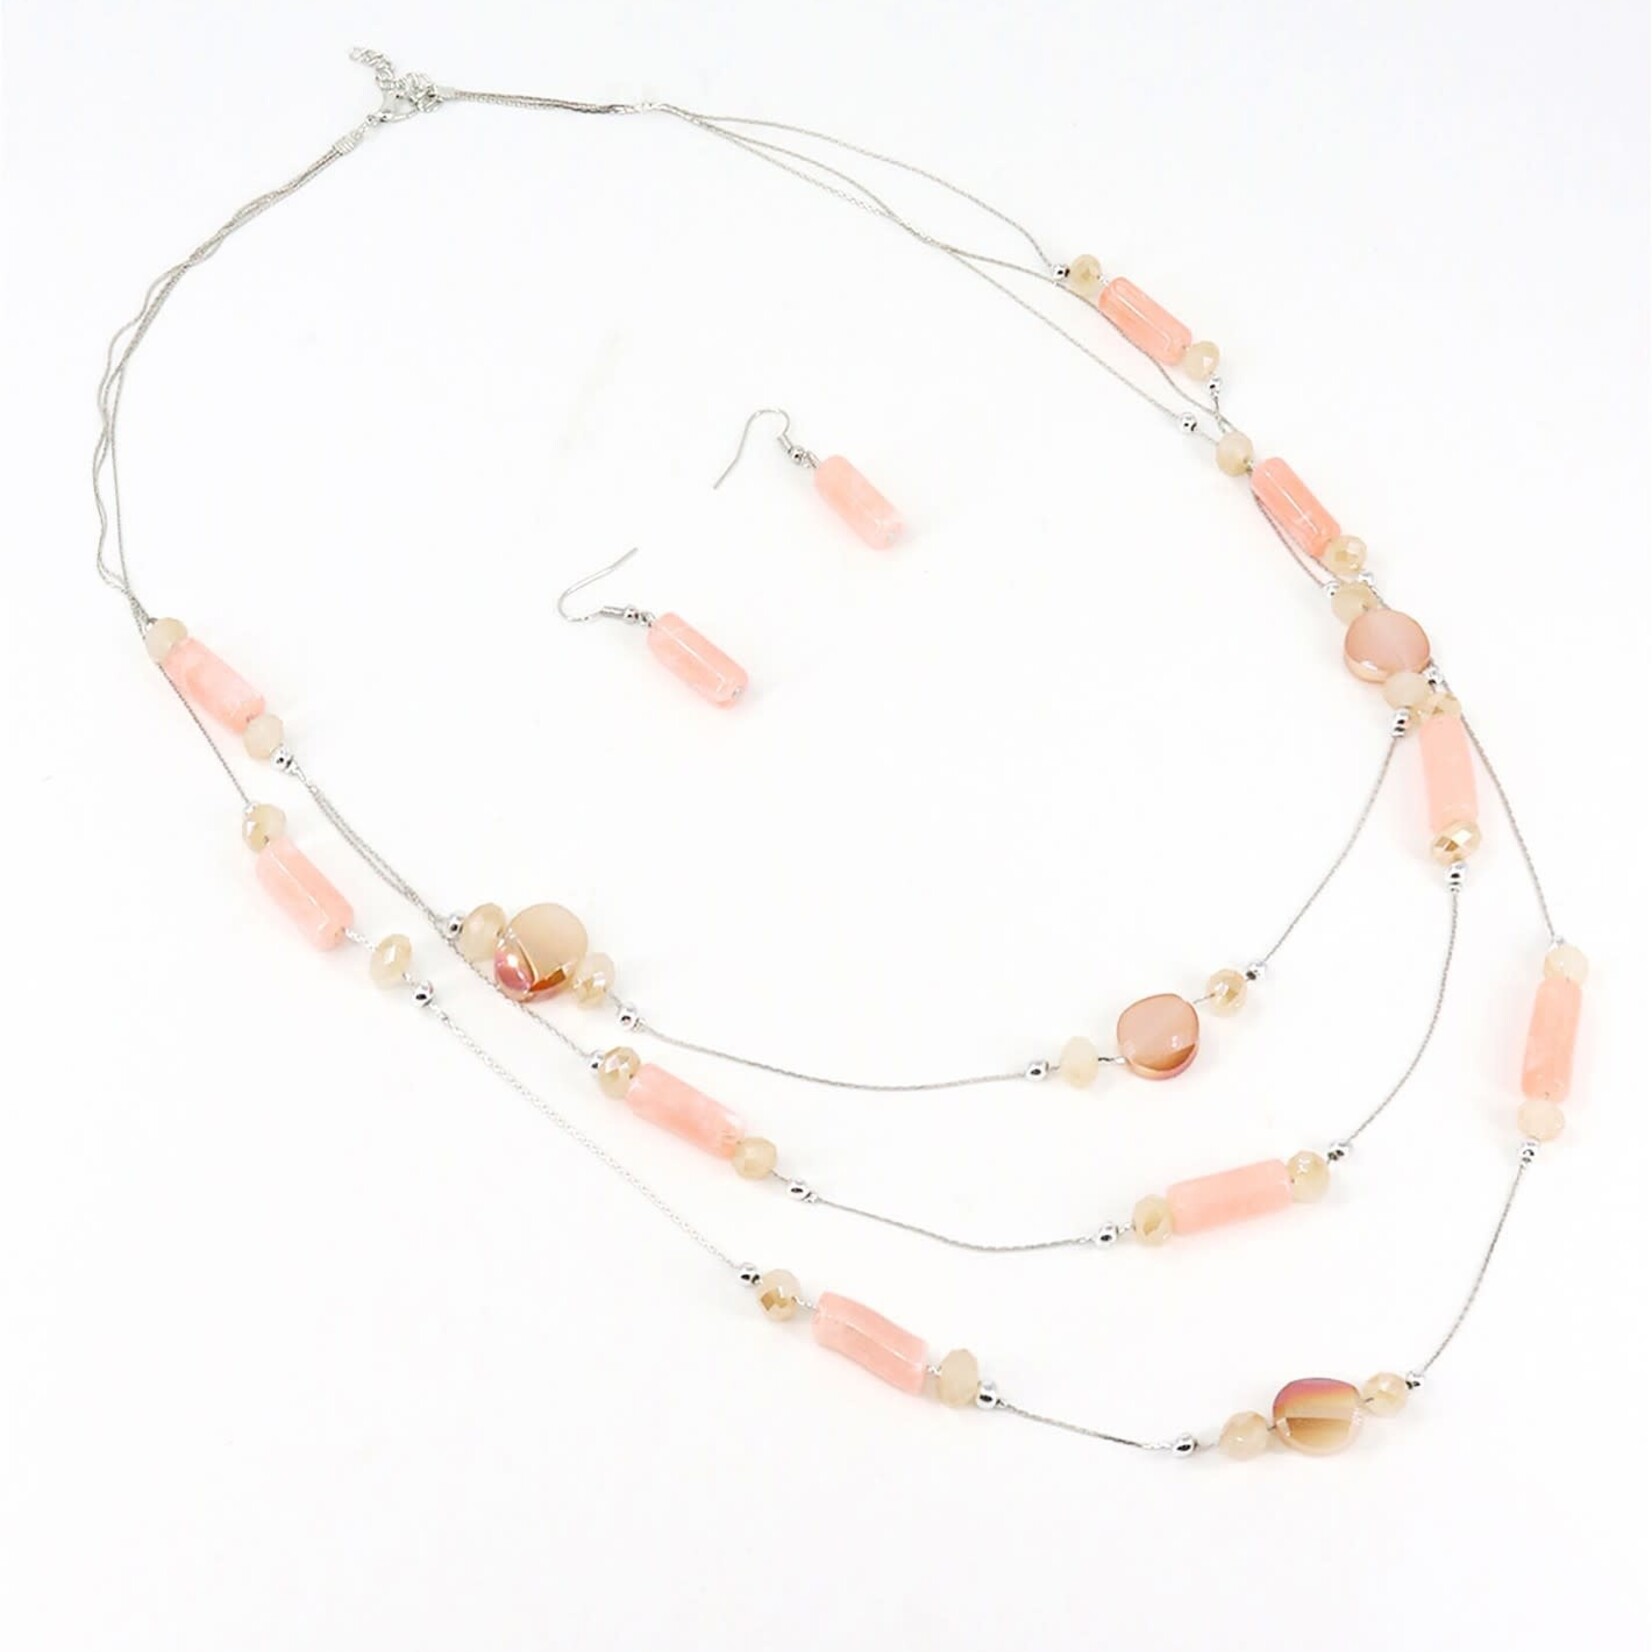 Rectangular Beads Necklace and Earrings Set-Blush